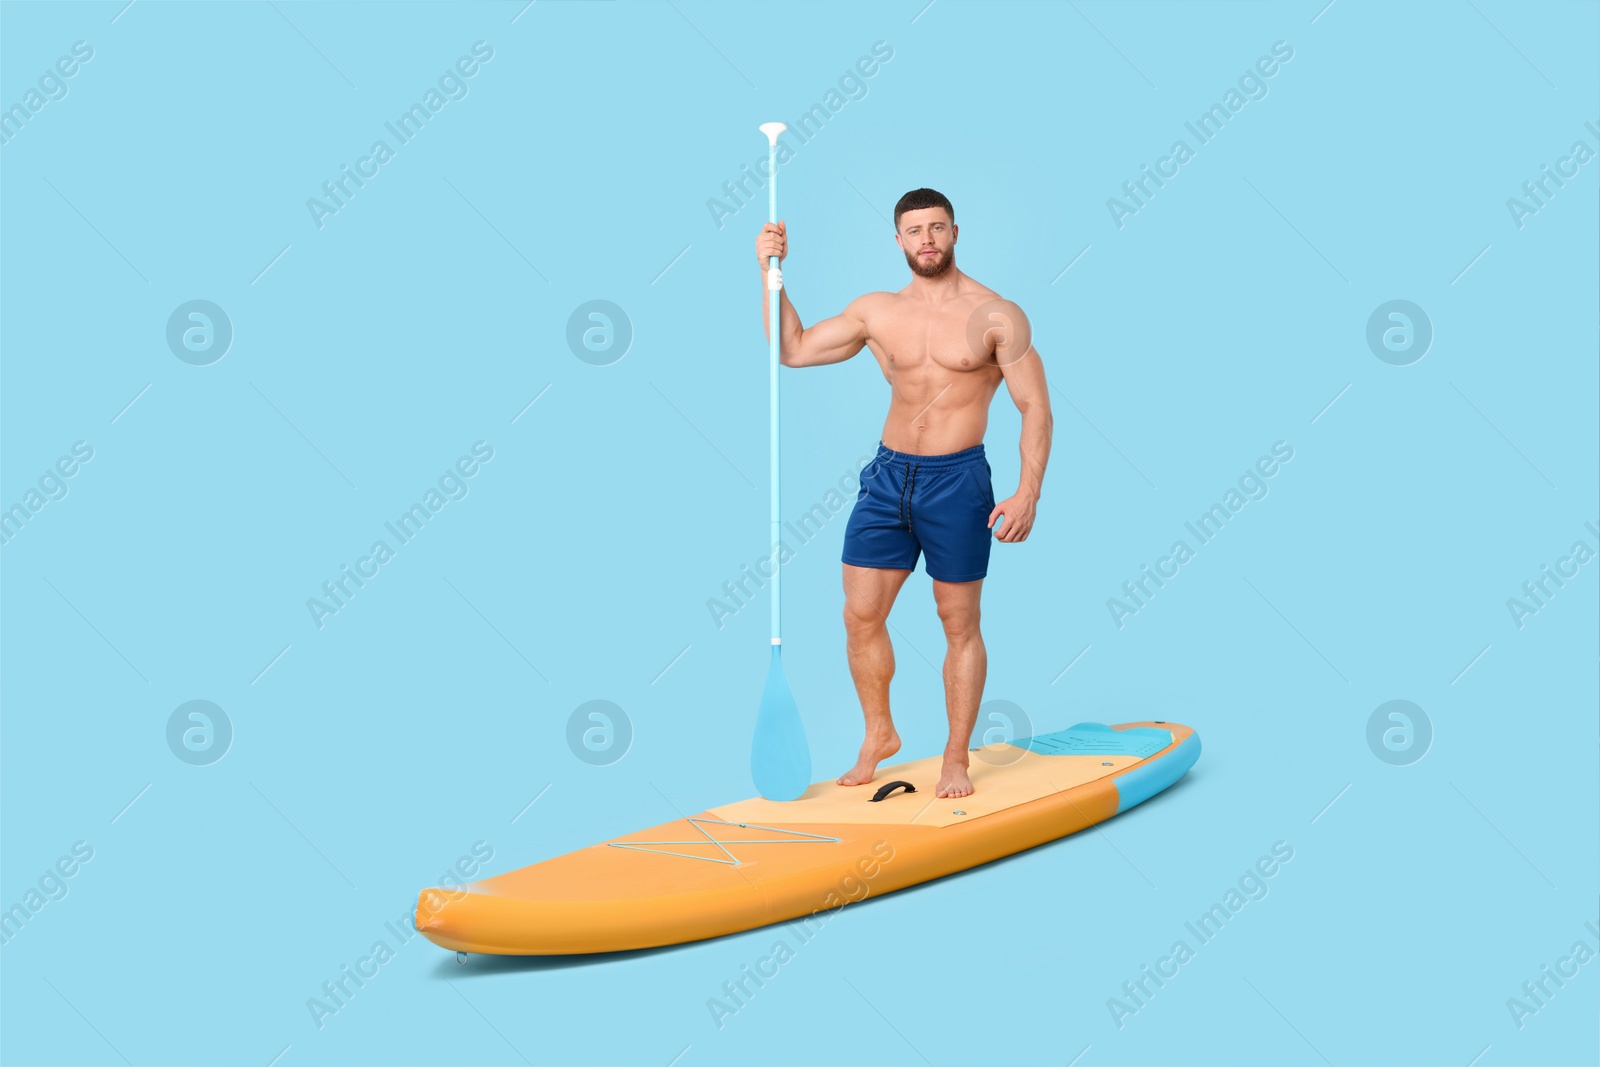 Photo of Handsome man with paddle on SUP board against light blue background